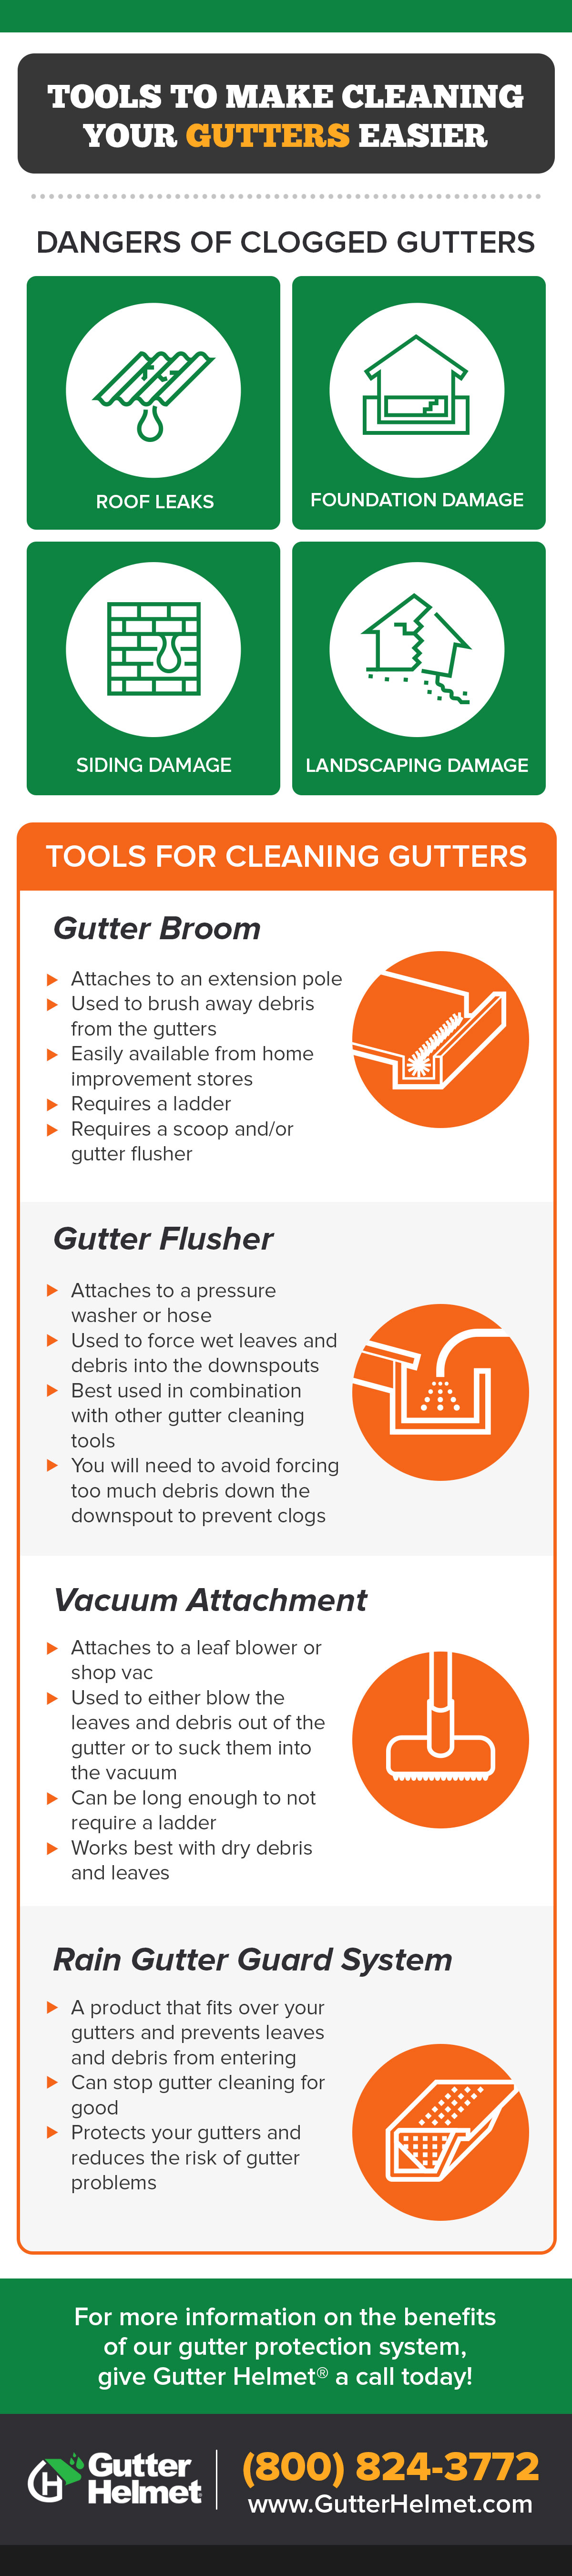 Infographics: Tools to Make Cleaning Your Gutters Easier